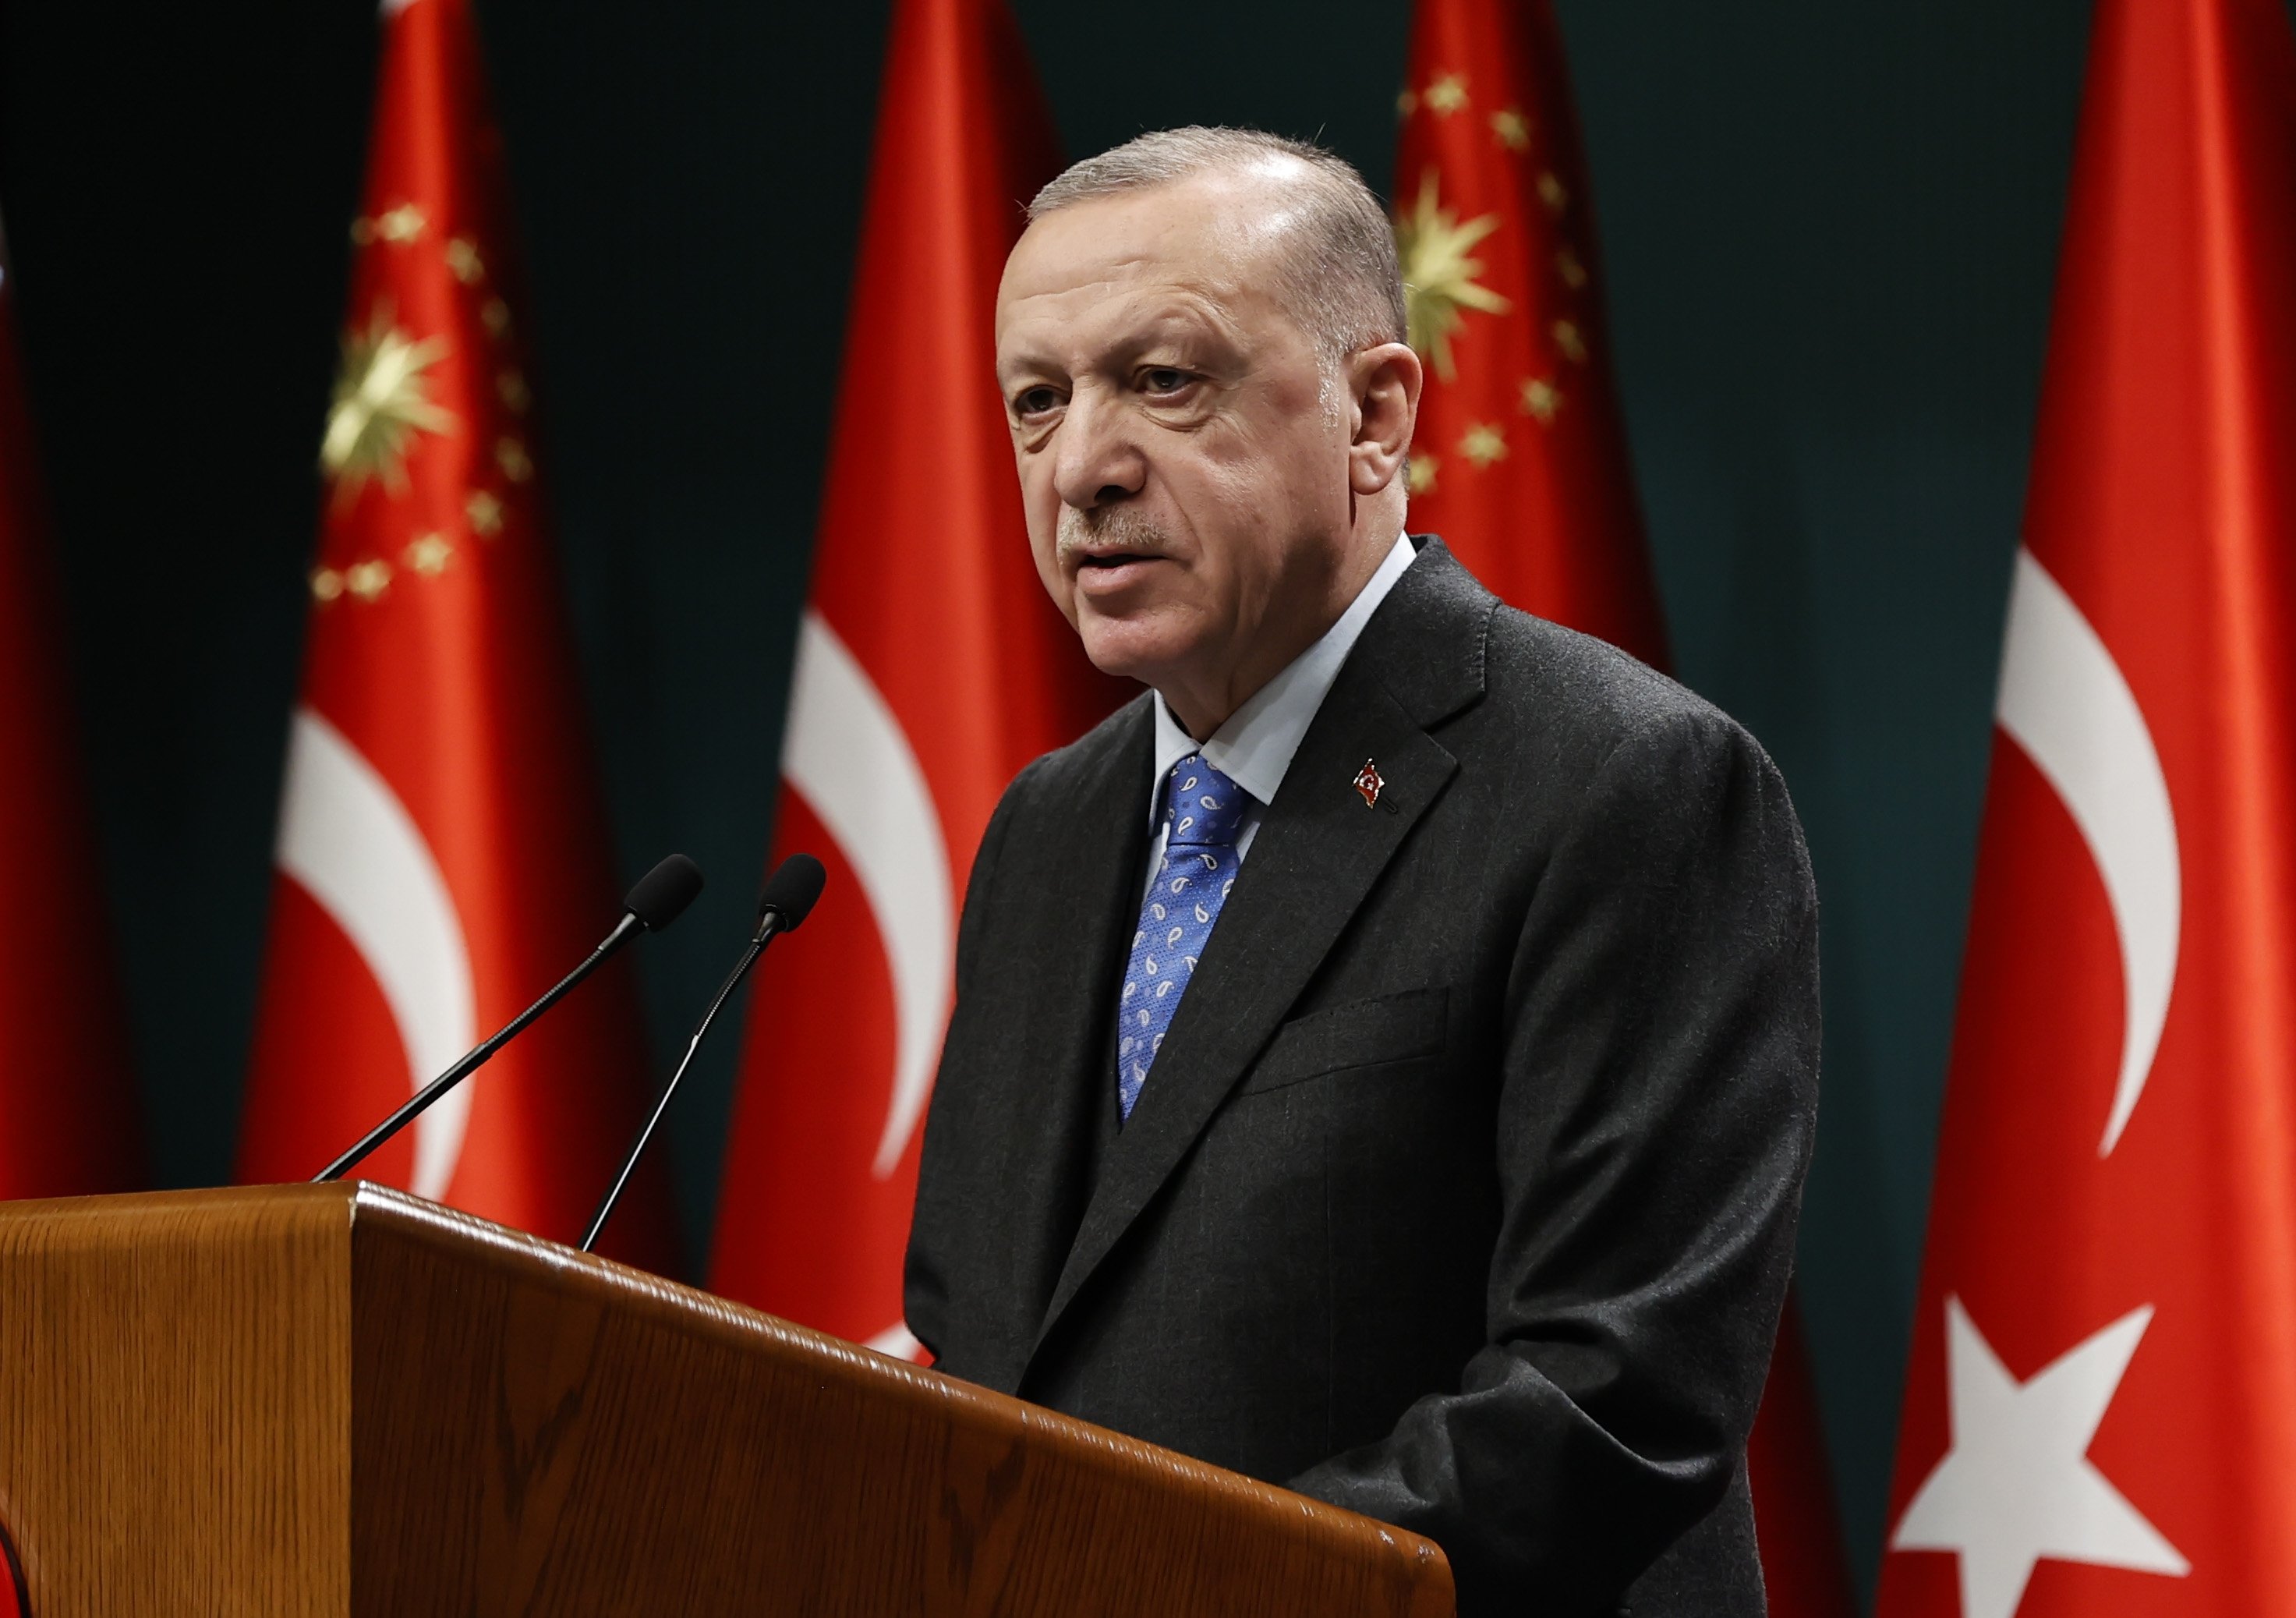 Turkey committed to Montreux to prevent escalation in Ukraine: Erdoğan | Daily Sabah